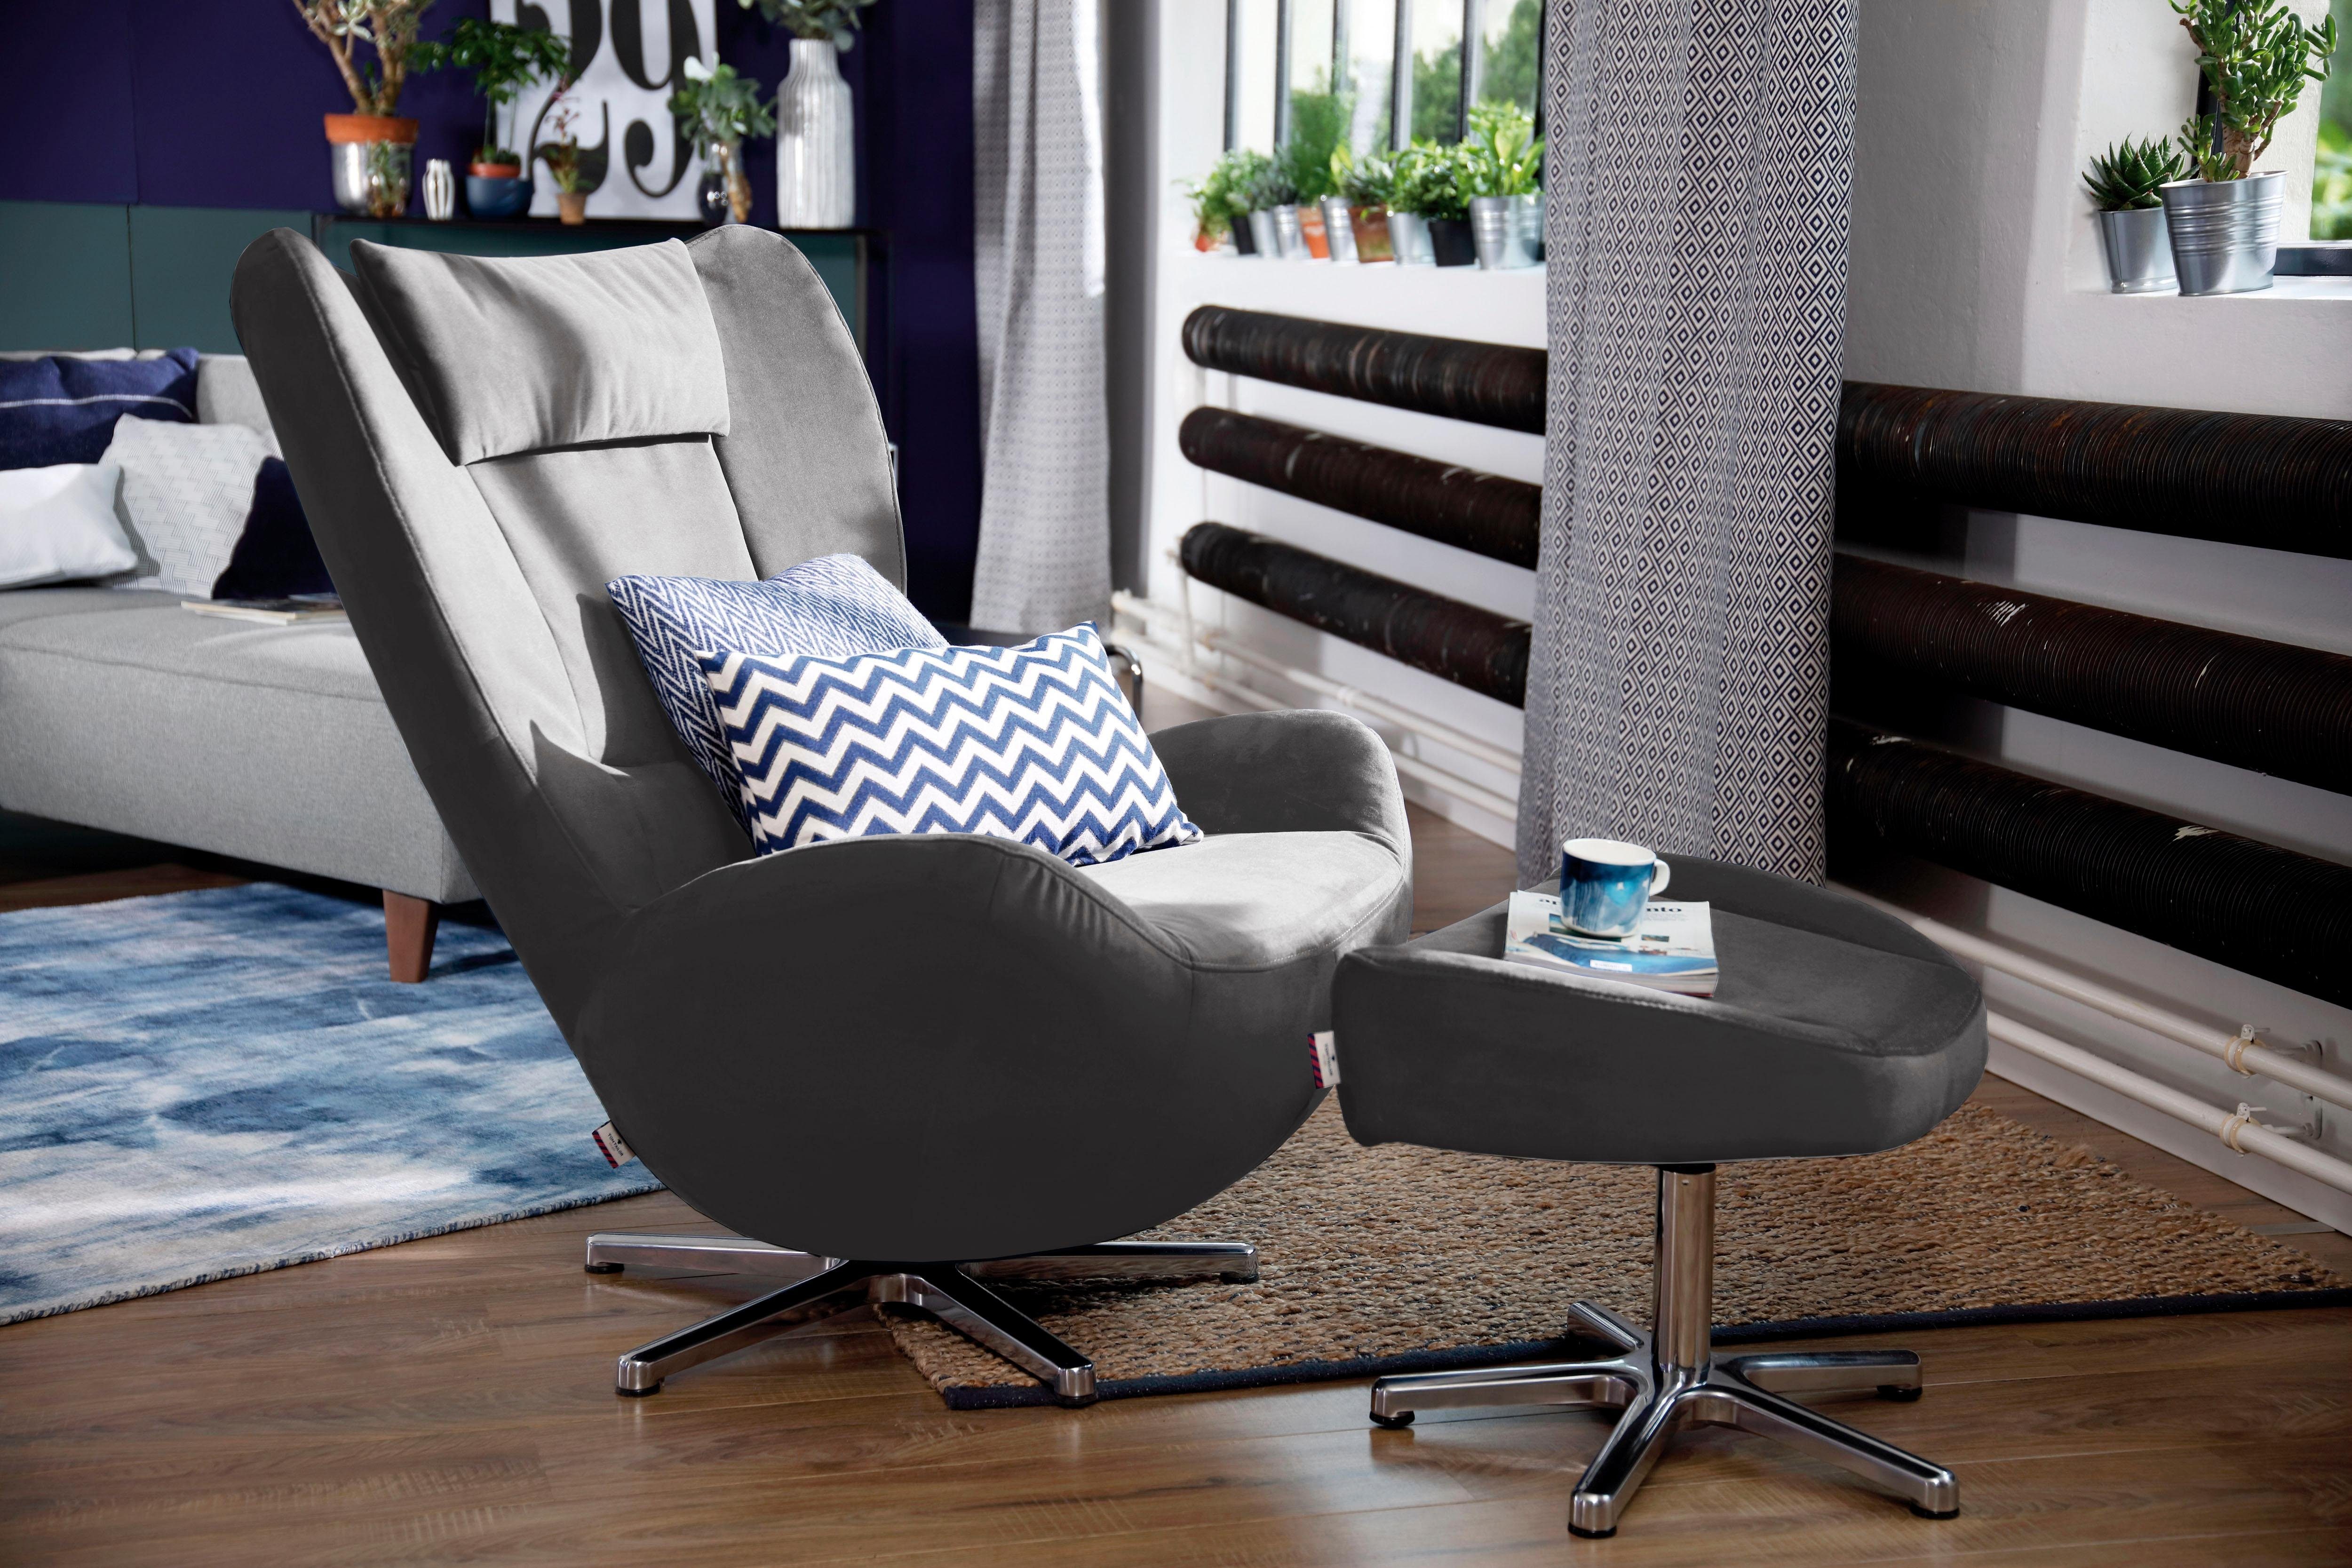 HOME Chrom Loungesessel mit TOM TOM TAILOR Metall-Drehfuß PURE, in